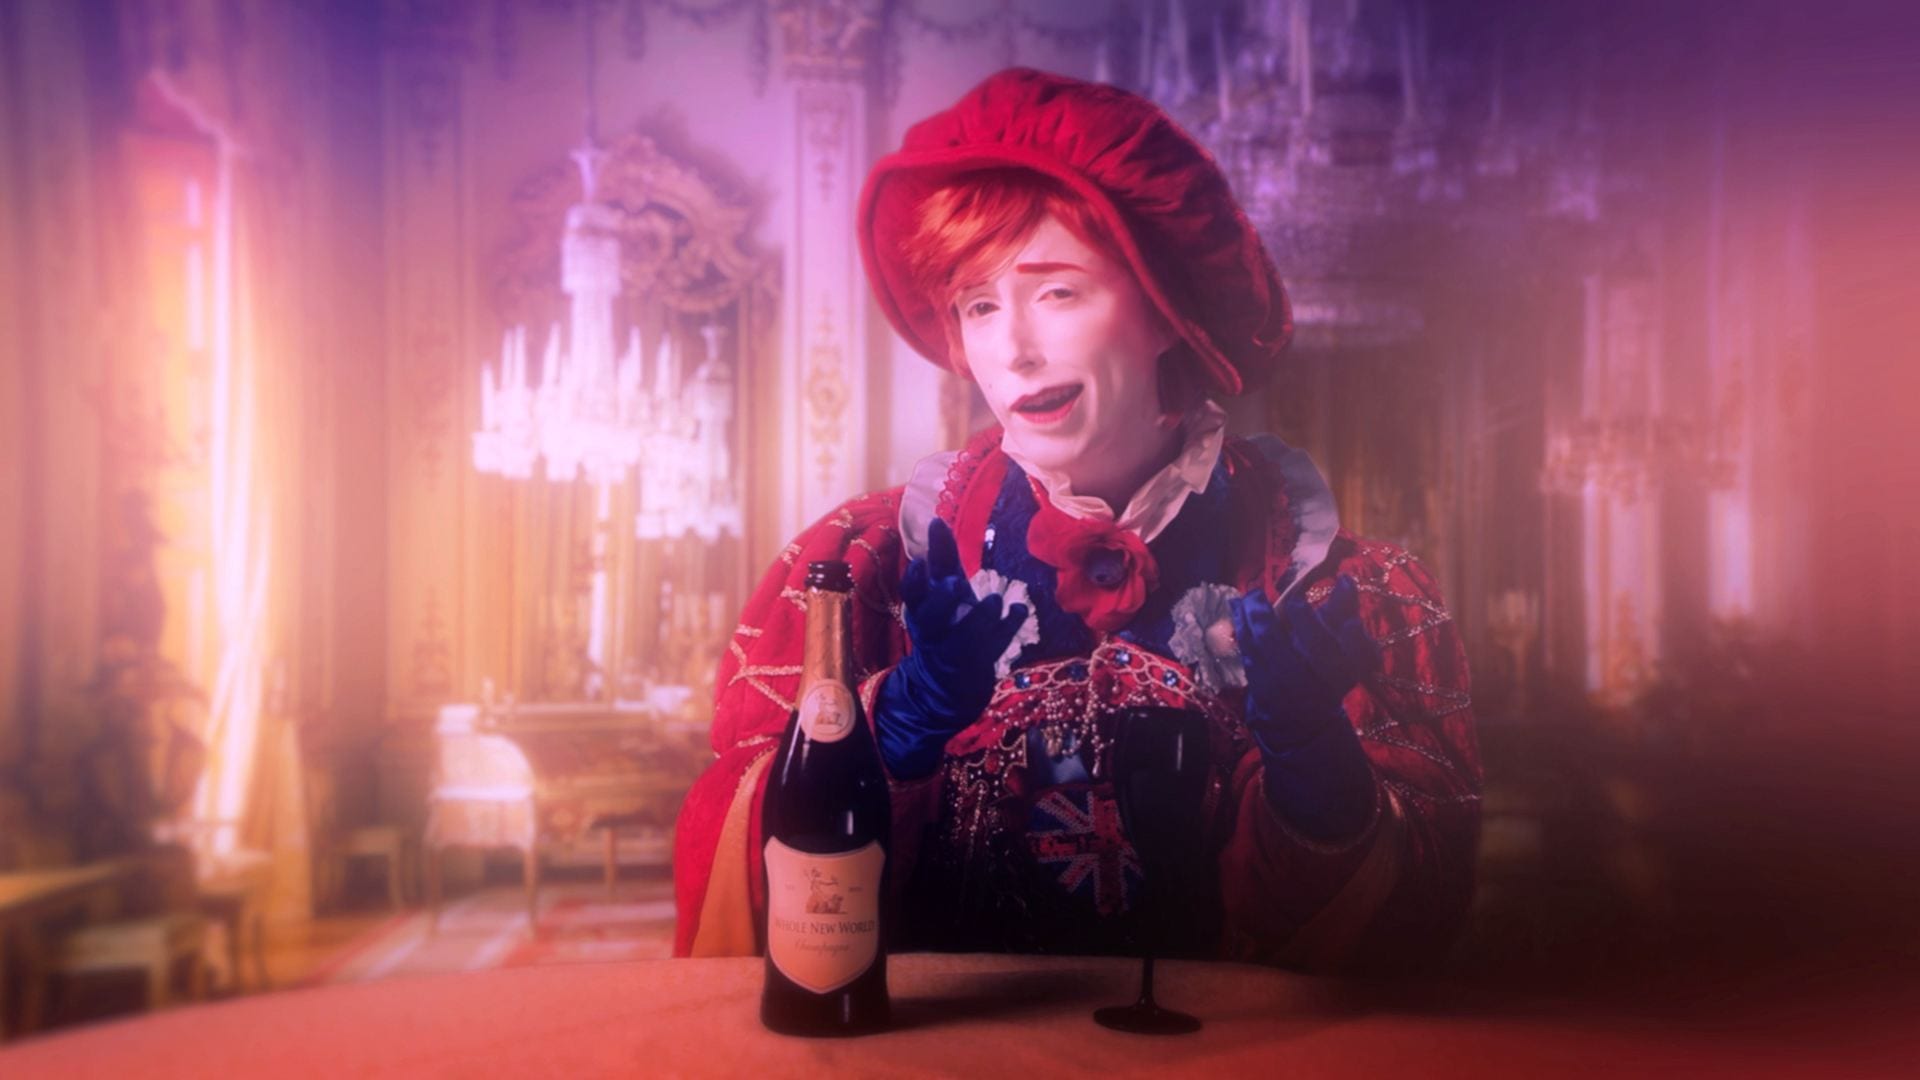 A young man sits at a table, dressed in garish expensive clothes including a red tam o' shanter hat and cape. He talks smugly to the camera. Next to him is a bottle of alcohol.